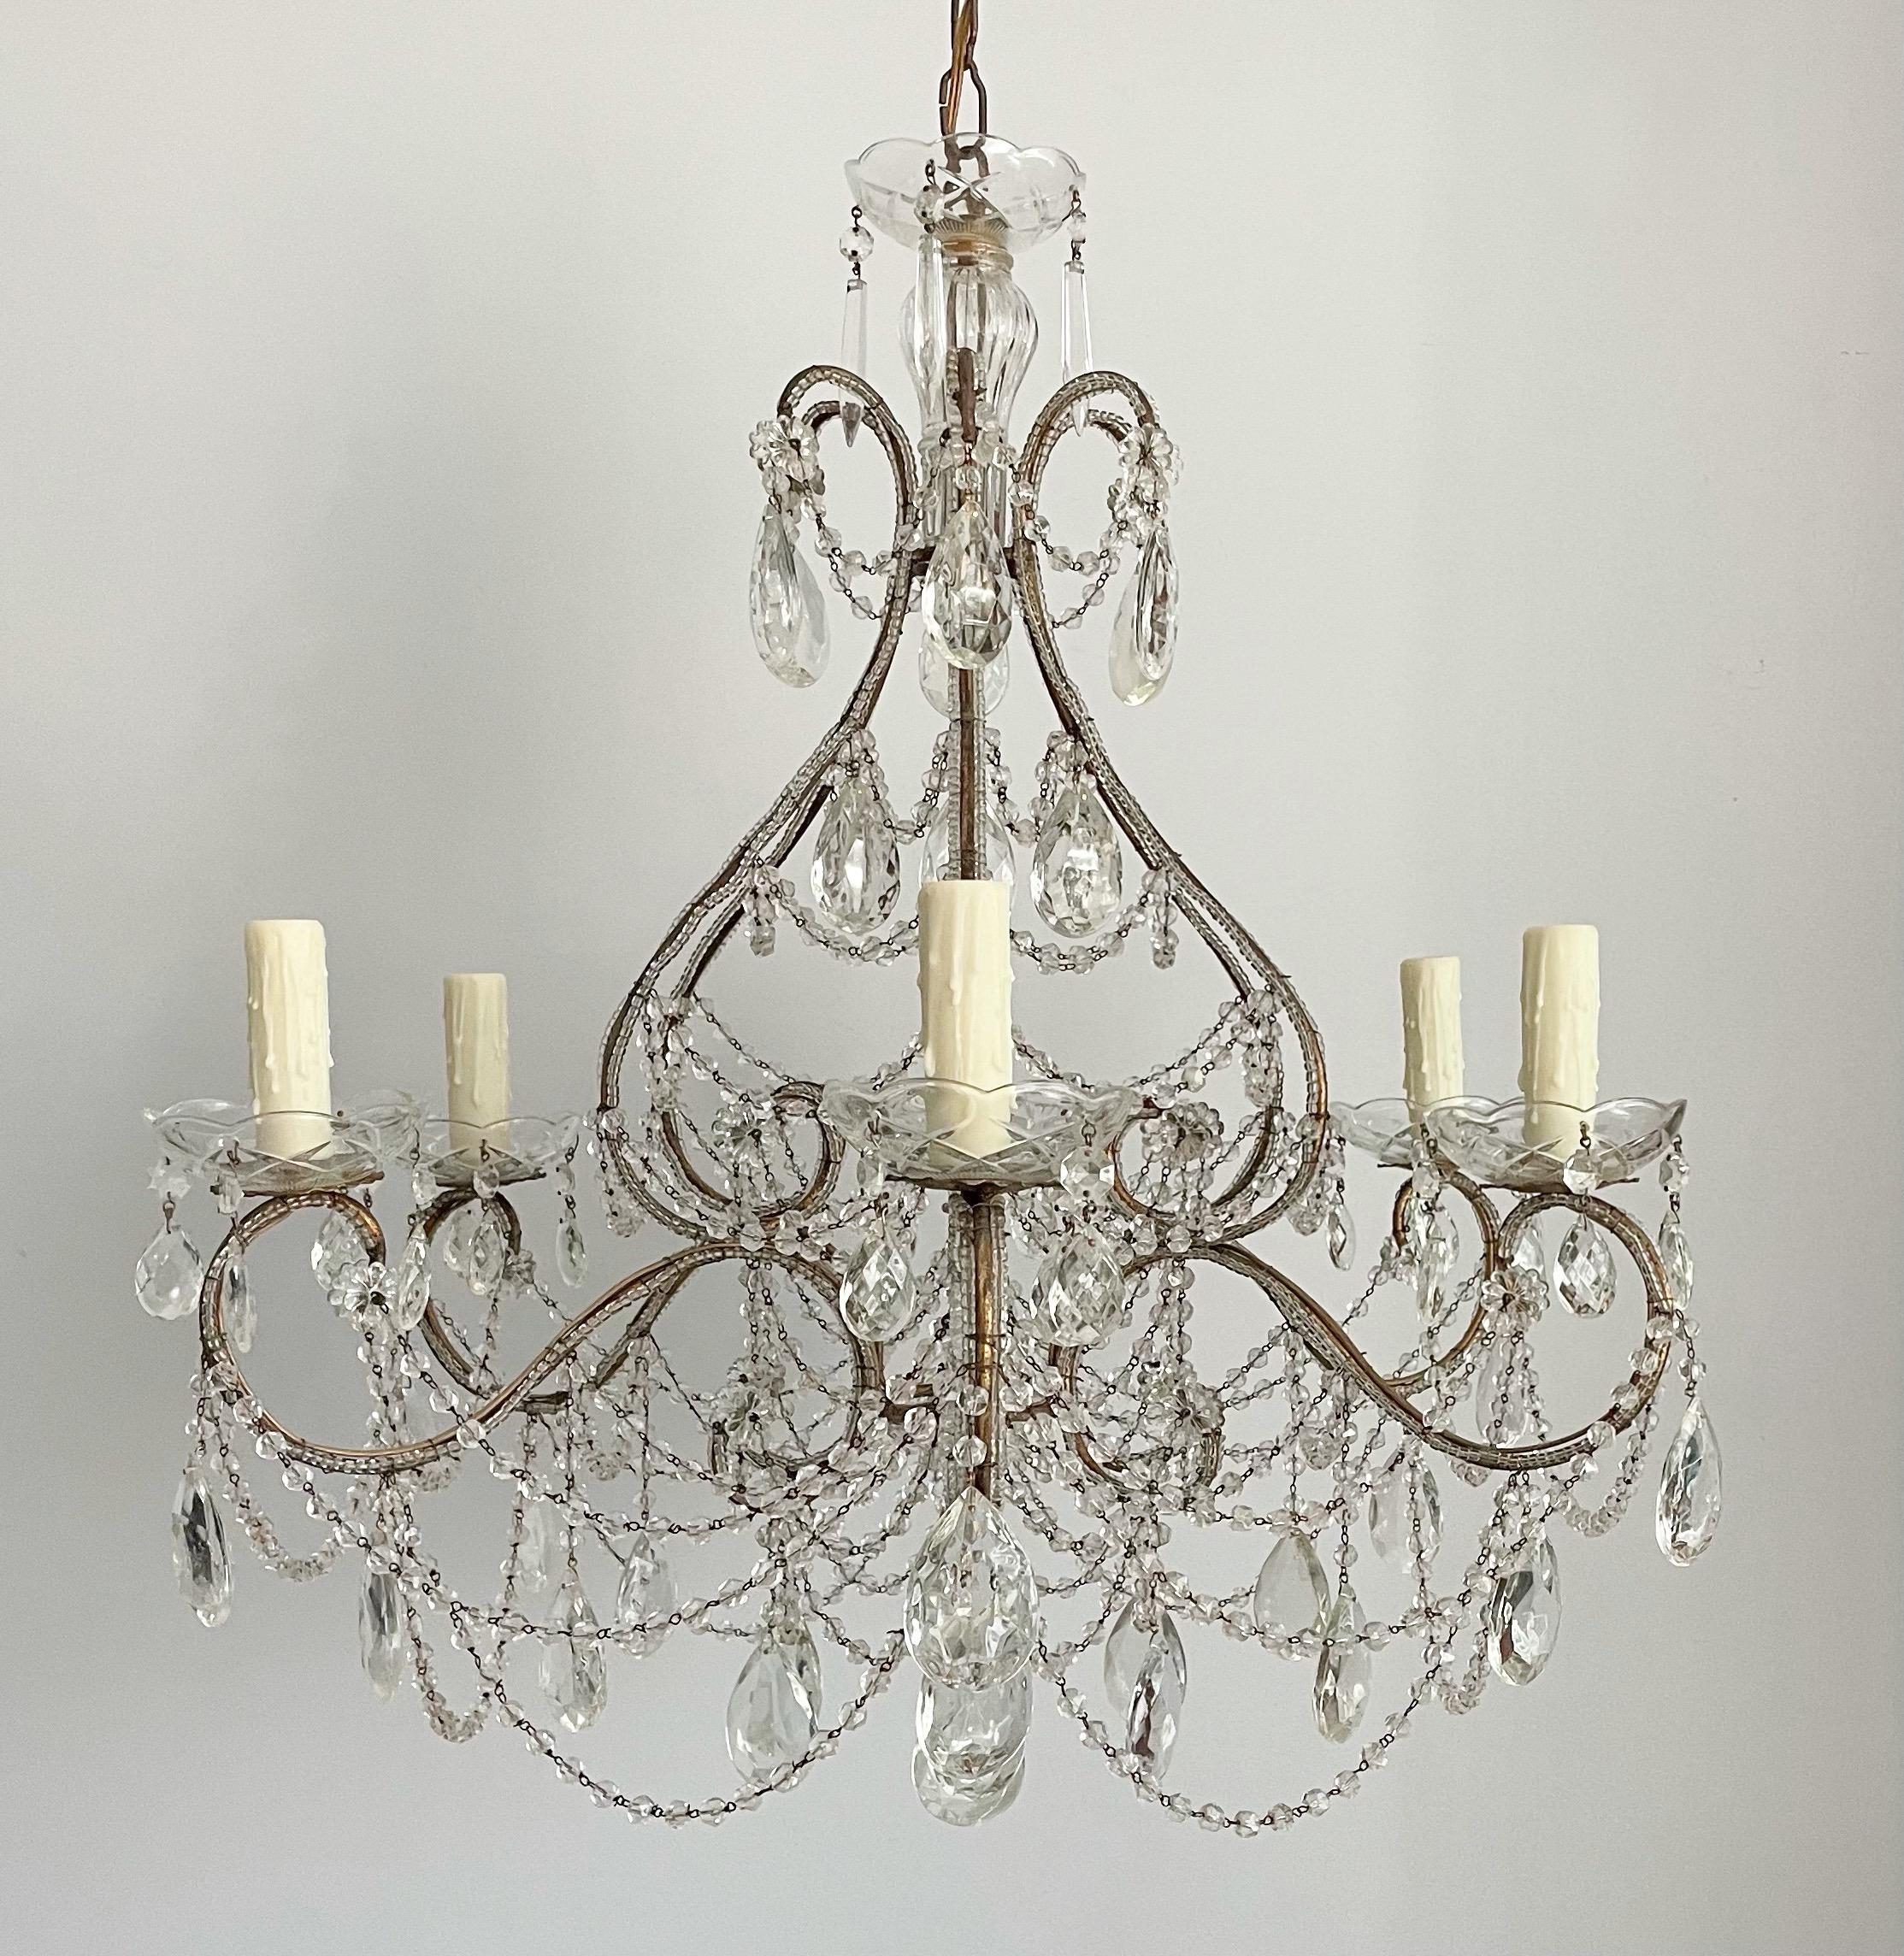 Beautiful, 1940s Italian gilt-iron and crystal beaded chandelier. 

The chandelier is defined by a graceful, scrolled iron frame with a gold-leafed finish. The frame is outlined with tiny glass beads, decorated with a bounty of “English cut” bead